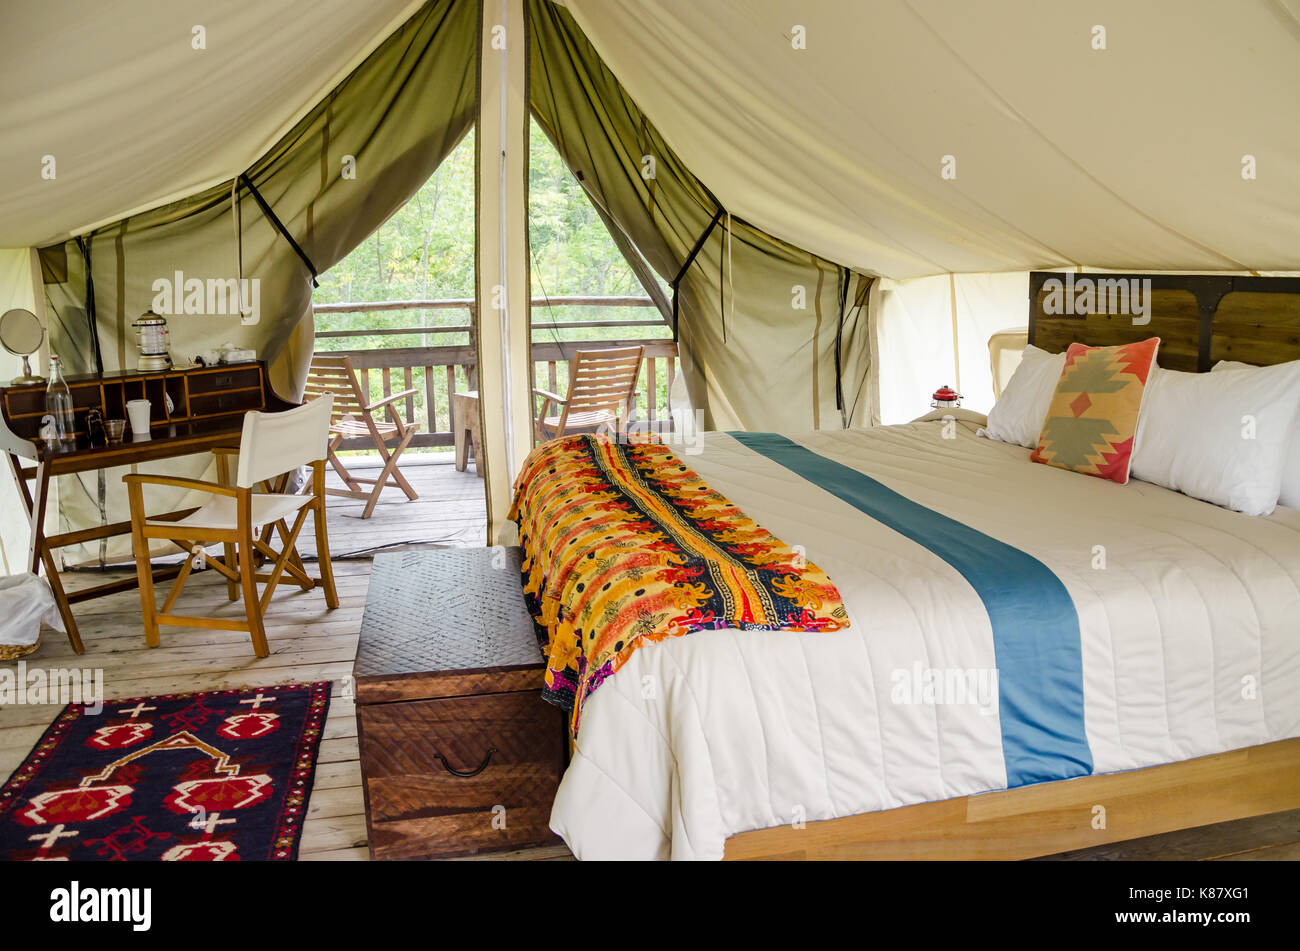 The inside of a glamor camping tent in New York. Stock Photo